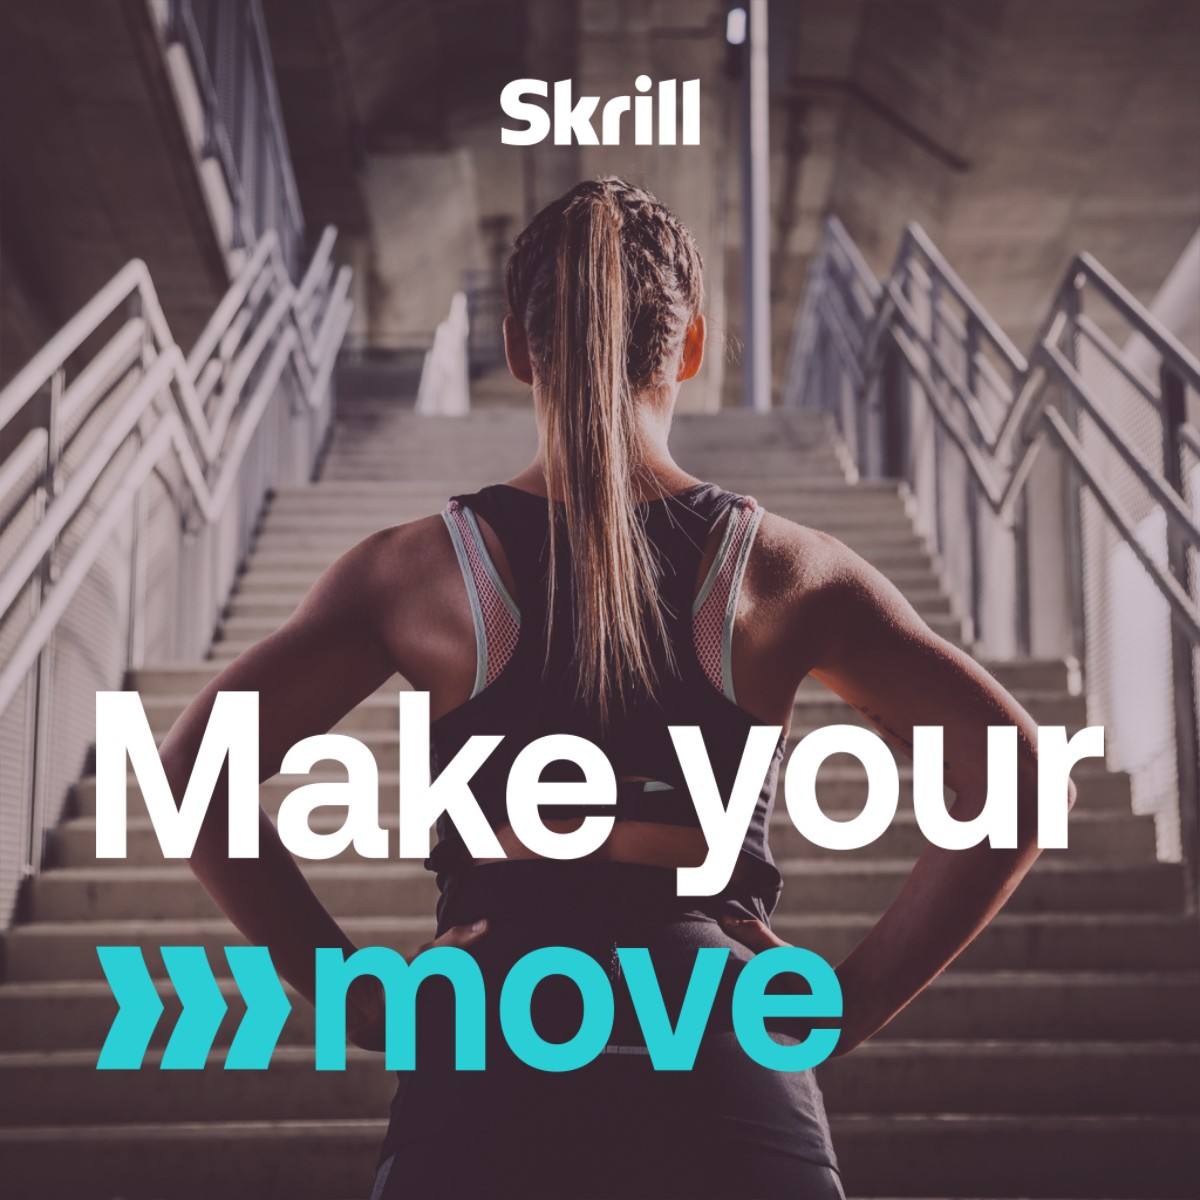 Check out the benefits when you Make your Move with Skrill today! ⬇️ More details >>> utm.guru/ugSvx⚡ #MakeYourMove #DigitalWallet #Payment